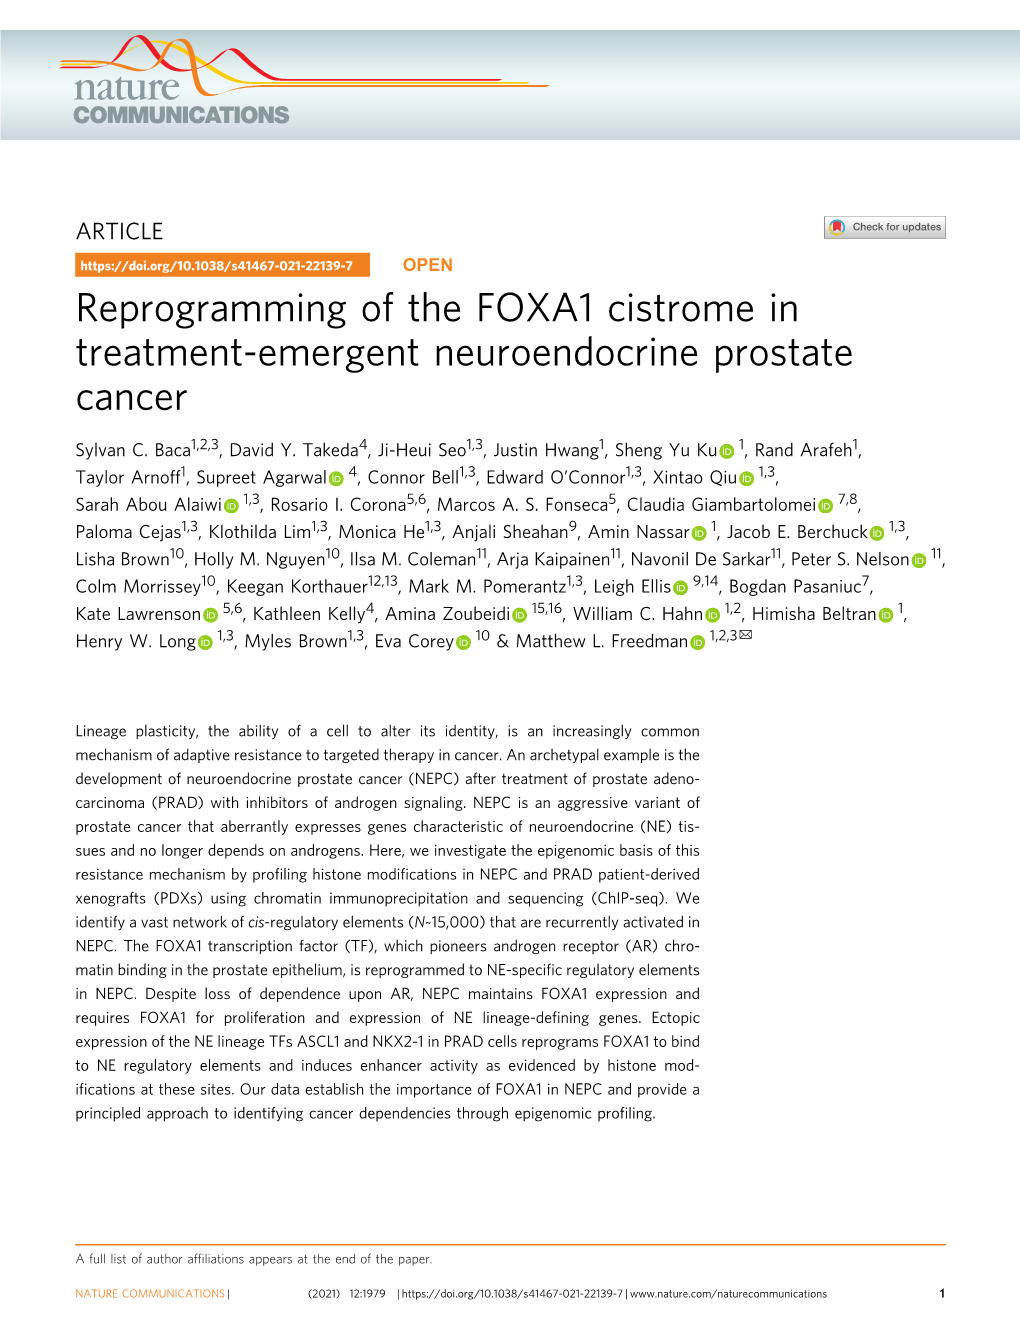 Reprogramming of the FOXA1 Cistrome in Treatment-Emergent Neuroendocrine Prostate Cancer